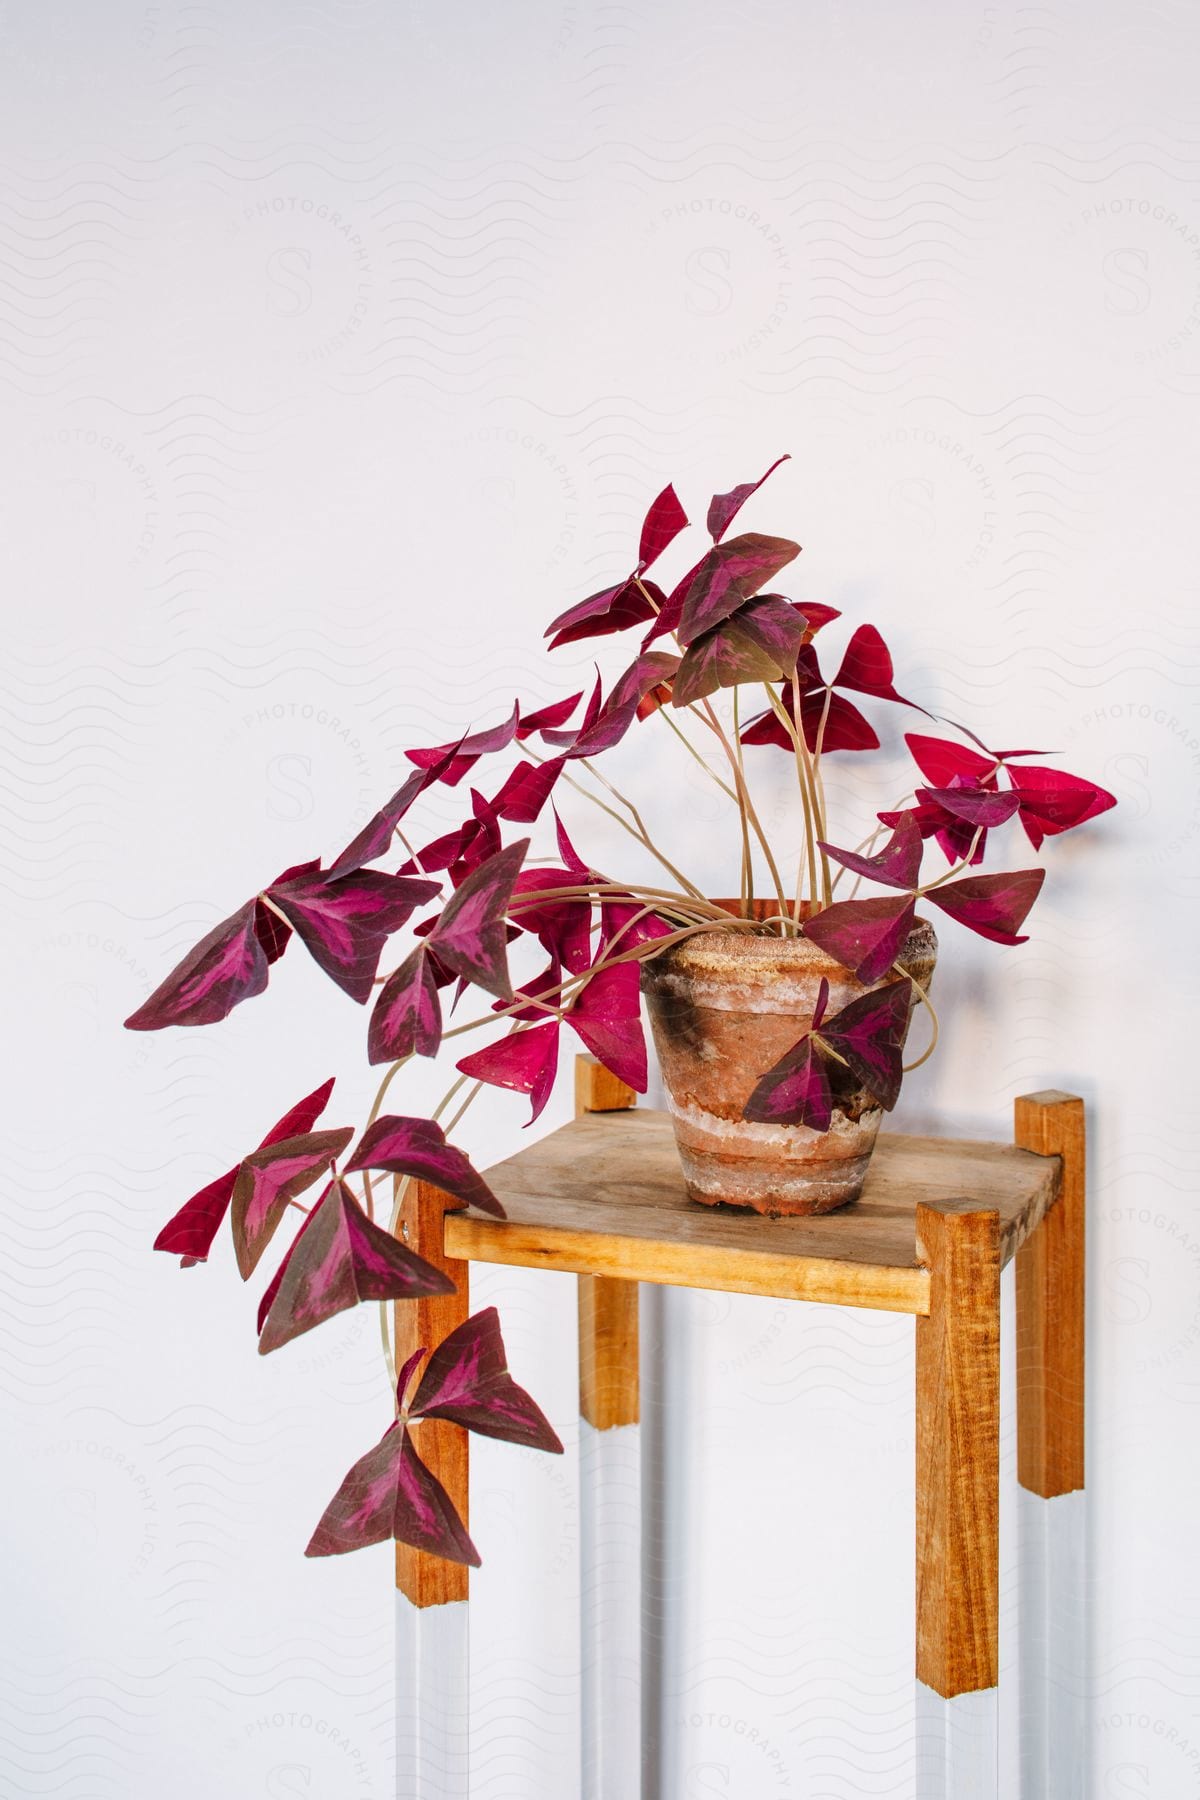 Pink triangular leaf plant draping over a brown pot on a wooden and white table